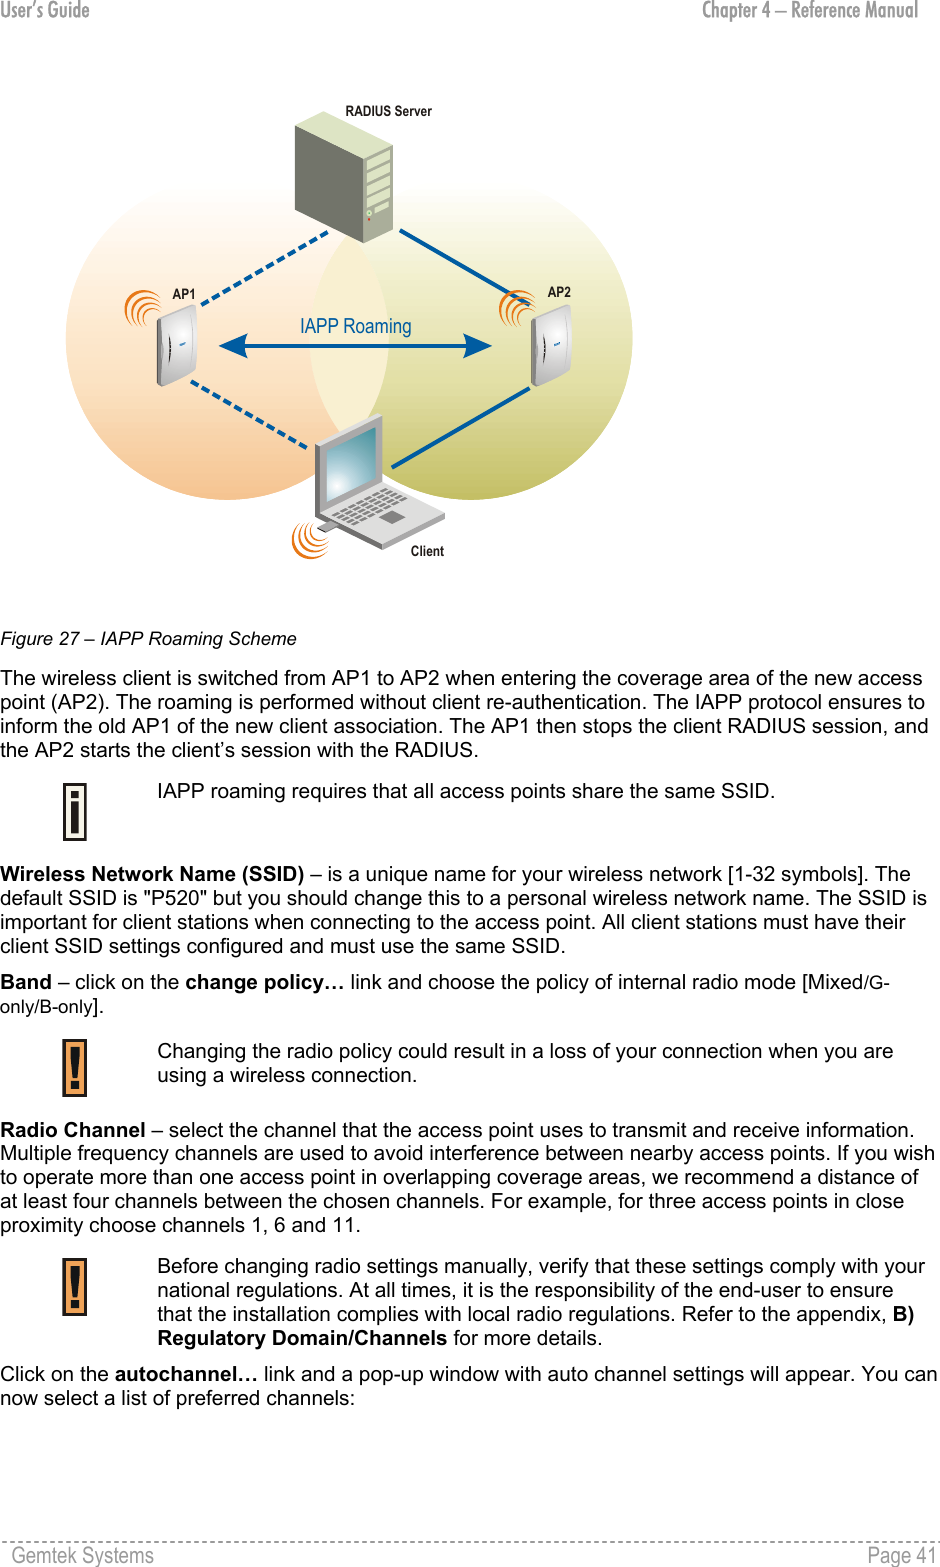 User’s Guide  Chapter 4 – Reference Manual IAPP RoamingAP1AP2ClientRADIUS Server Figure 27 – IAPP Roaming Scheme The wireless client is switched from AP1 to AP2 when entering the coverage area of the new access point (AP2). The roaming is performed without client re-authentication. The IAPP protocol ensures to inform the old AP1 of the new client association. The AP1 then stops the client RADIUS session, and the AP2 starts the client’s session with the RADIUS.  IAPP roaming requires that all access points share the same SSID. Wireless Network Name (SSID) – is a unique name for your wireless network [1-32 symbols]. The default SSID is &quot;P520&quot; but you should change this to a personal wireless network name. The SSID is important for client stations when connecting to the access point. All client stations must have their client SSID settings configured and must use the same SSID. Band – click on the change policy… link and choose the policy of internal radio mode [Mixed/G-only/B-only].  Changing the radio policy could result in a loss of your connection when you are using a wireless connection. Radio Channel – select the channel that the access point uses to transmit and receive information. Multiple frequency channels are used to avoid interference between nearby access points. If you wish to operate more than one access point in overlapping coverage areas, we recommend a distance of at least four channels between the chosen channels. For example, for three access points in close proximity choose channels 1, 6 and 11.  Before changing radio settings manually, verify that these settings comply with your national regulations. At all times, it is the responsibility of the end-user to ensure that the installation complies with local radio regulations. Refer to the appendix, B) Regulatory Domain/Channels for more details. Click on the autochannel… link and a pop-up window with auto channel settings will appear. You can now select a list of preferred channels:  Gemtek Systems    Page 41  